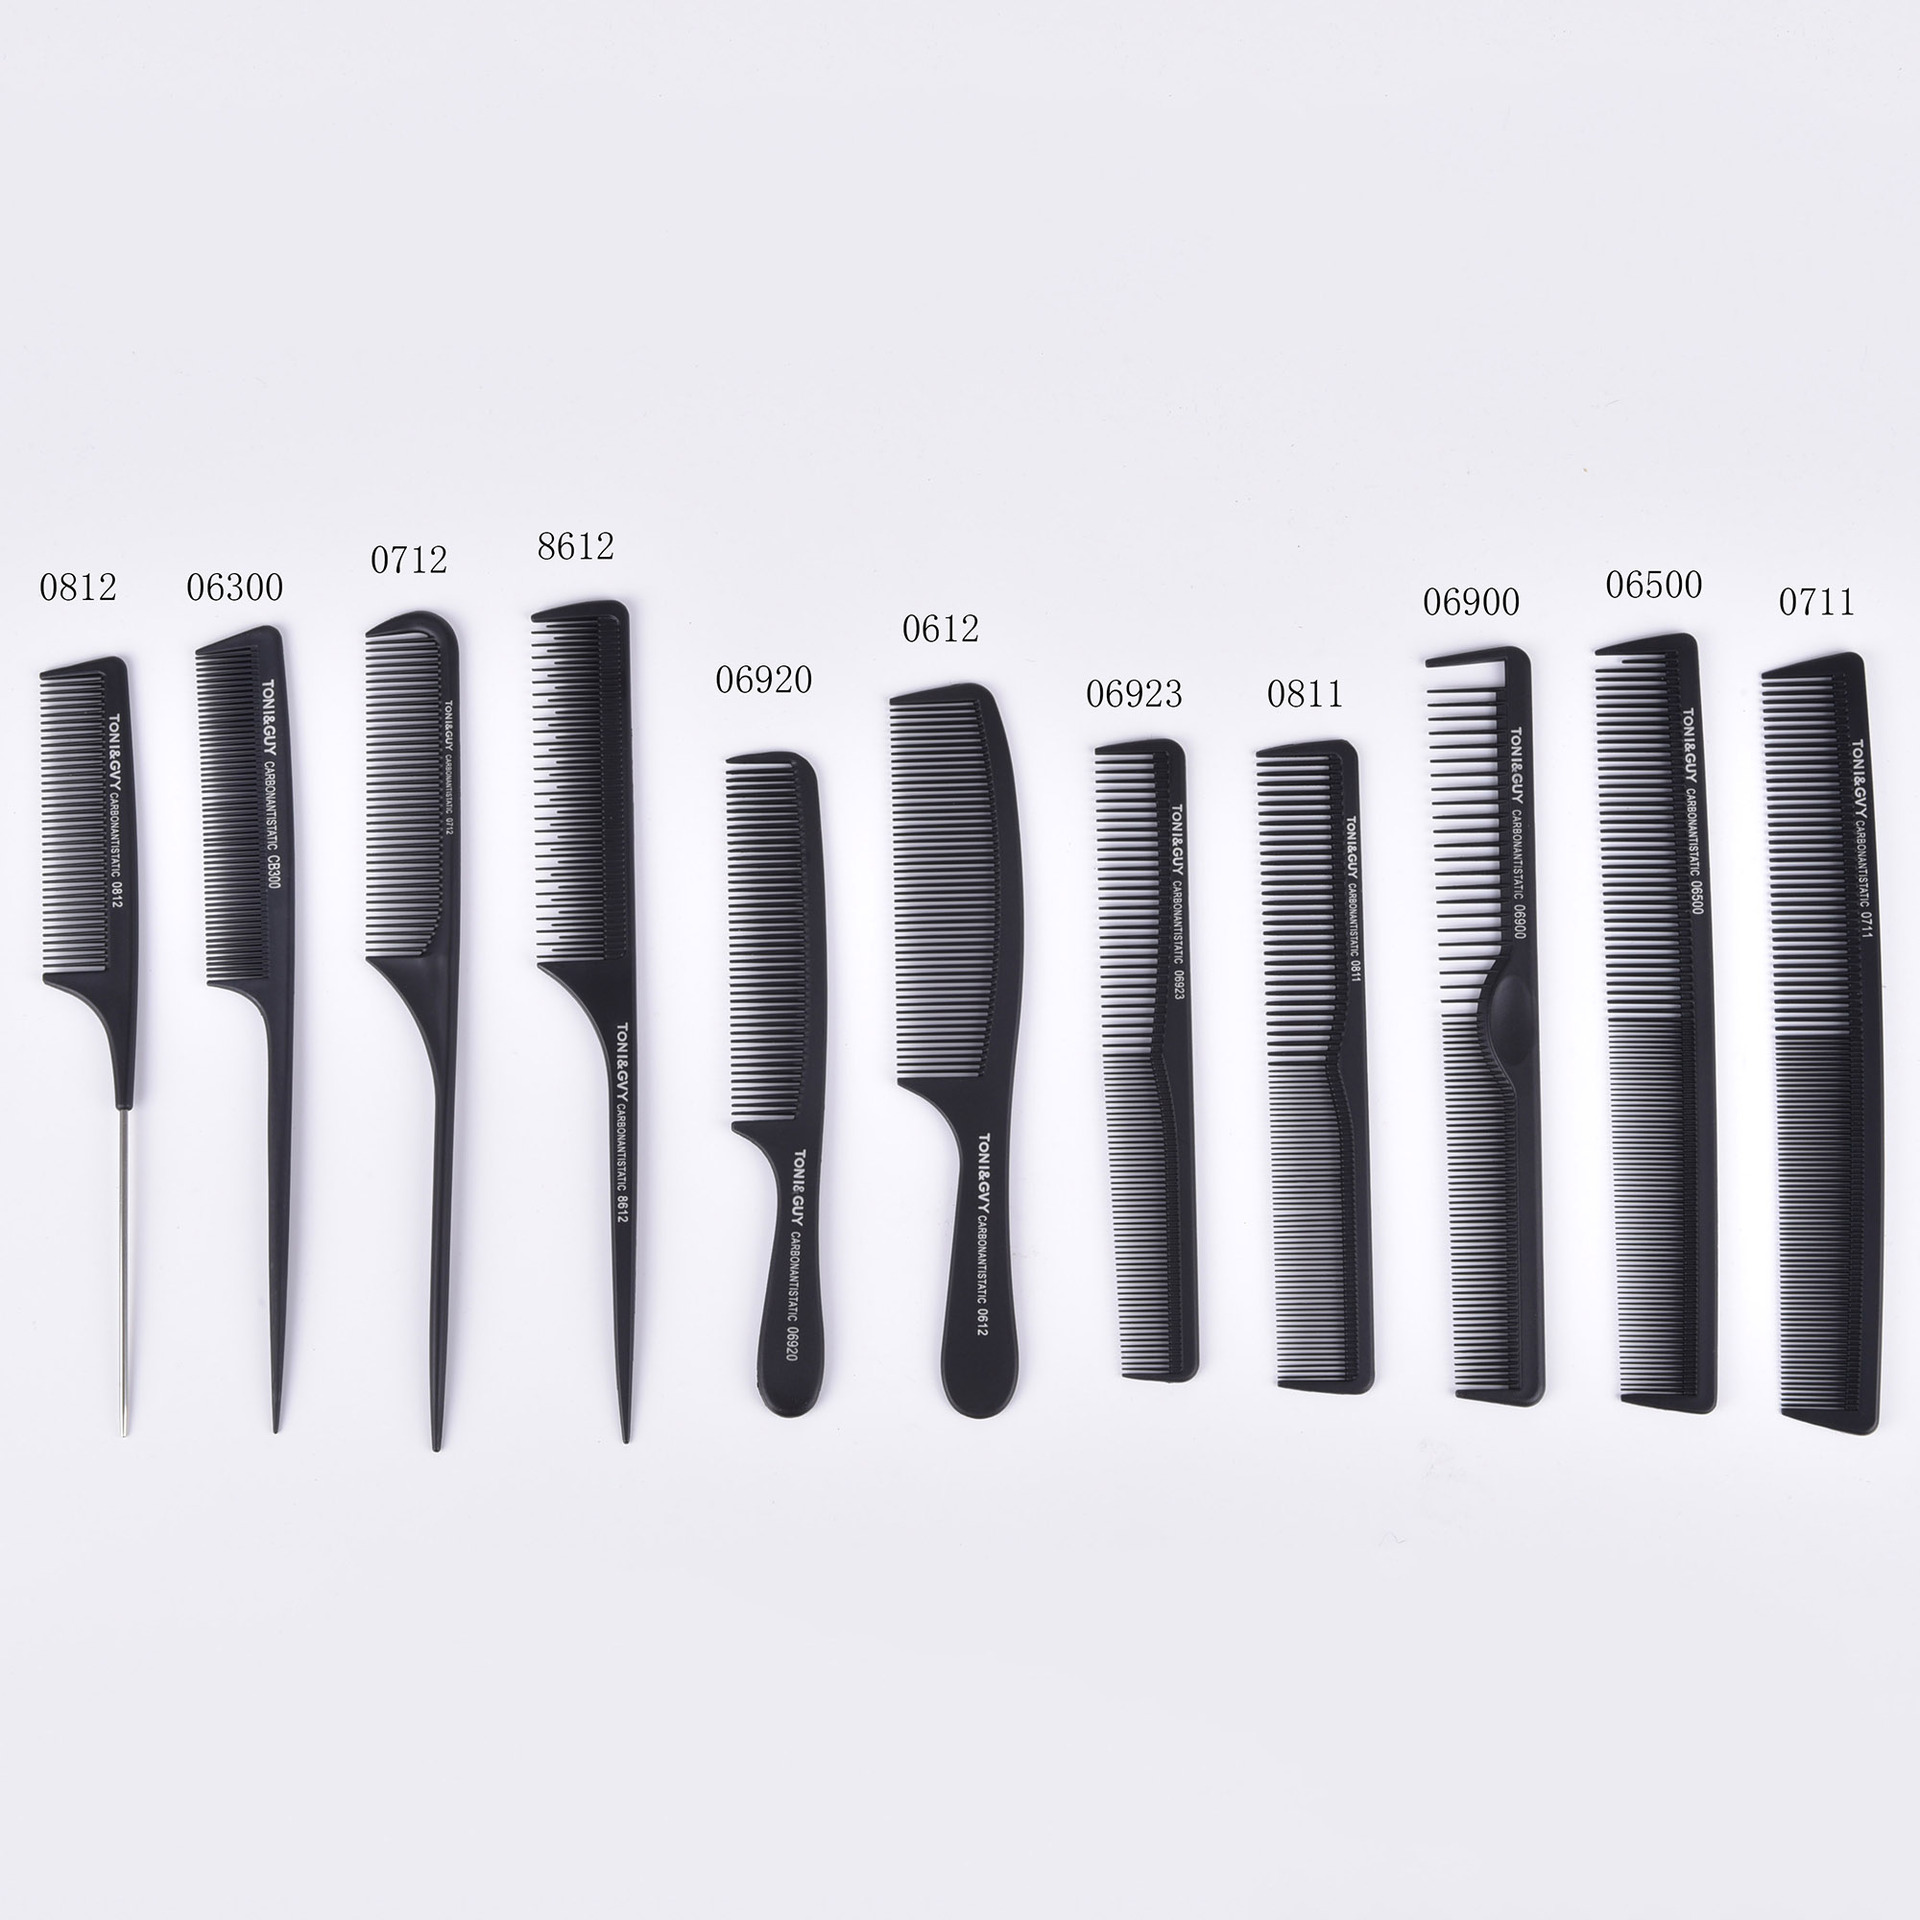 Tony Cover Carbon Fiber Comb Plastic Pointed Tail Comb Hair Cutting Style Comb Makeup Comb Steel Needle Barber Comb Factory Customization